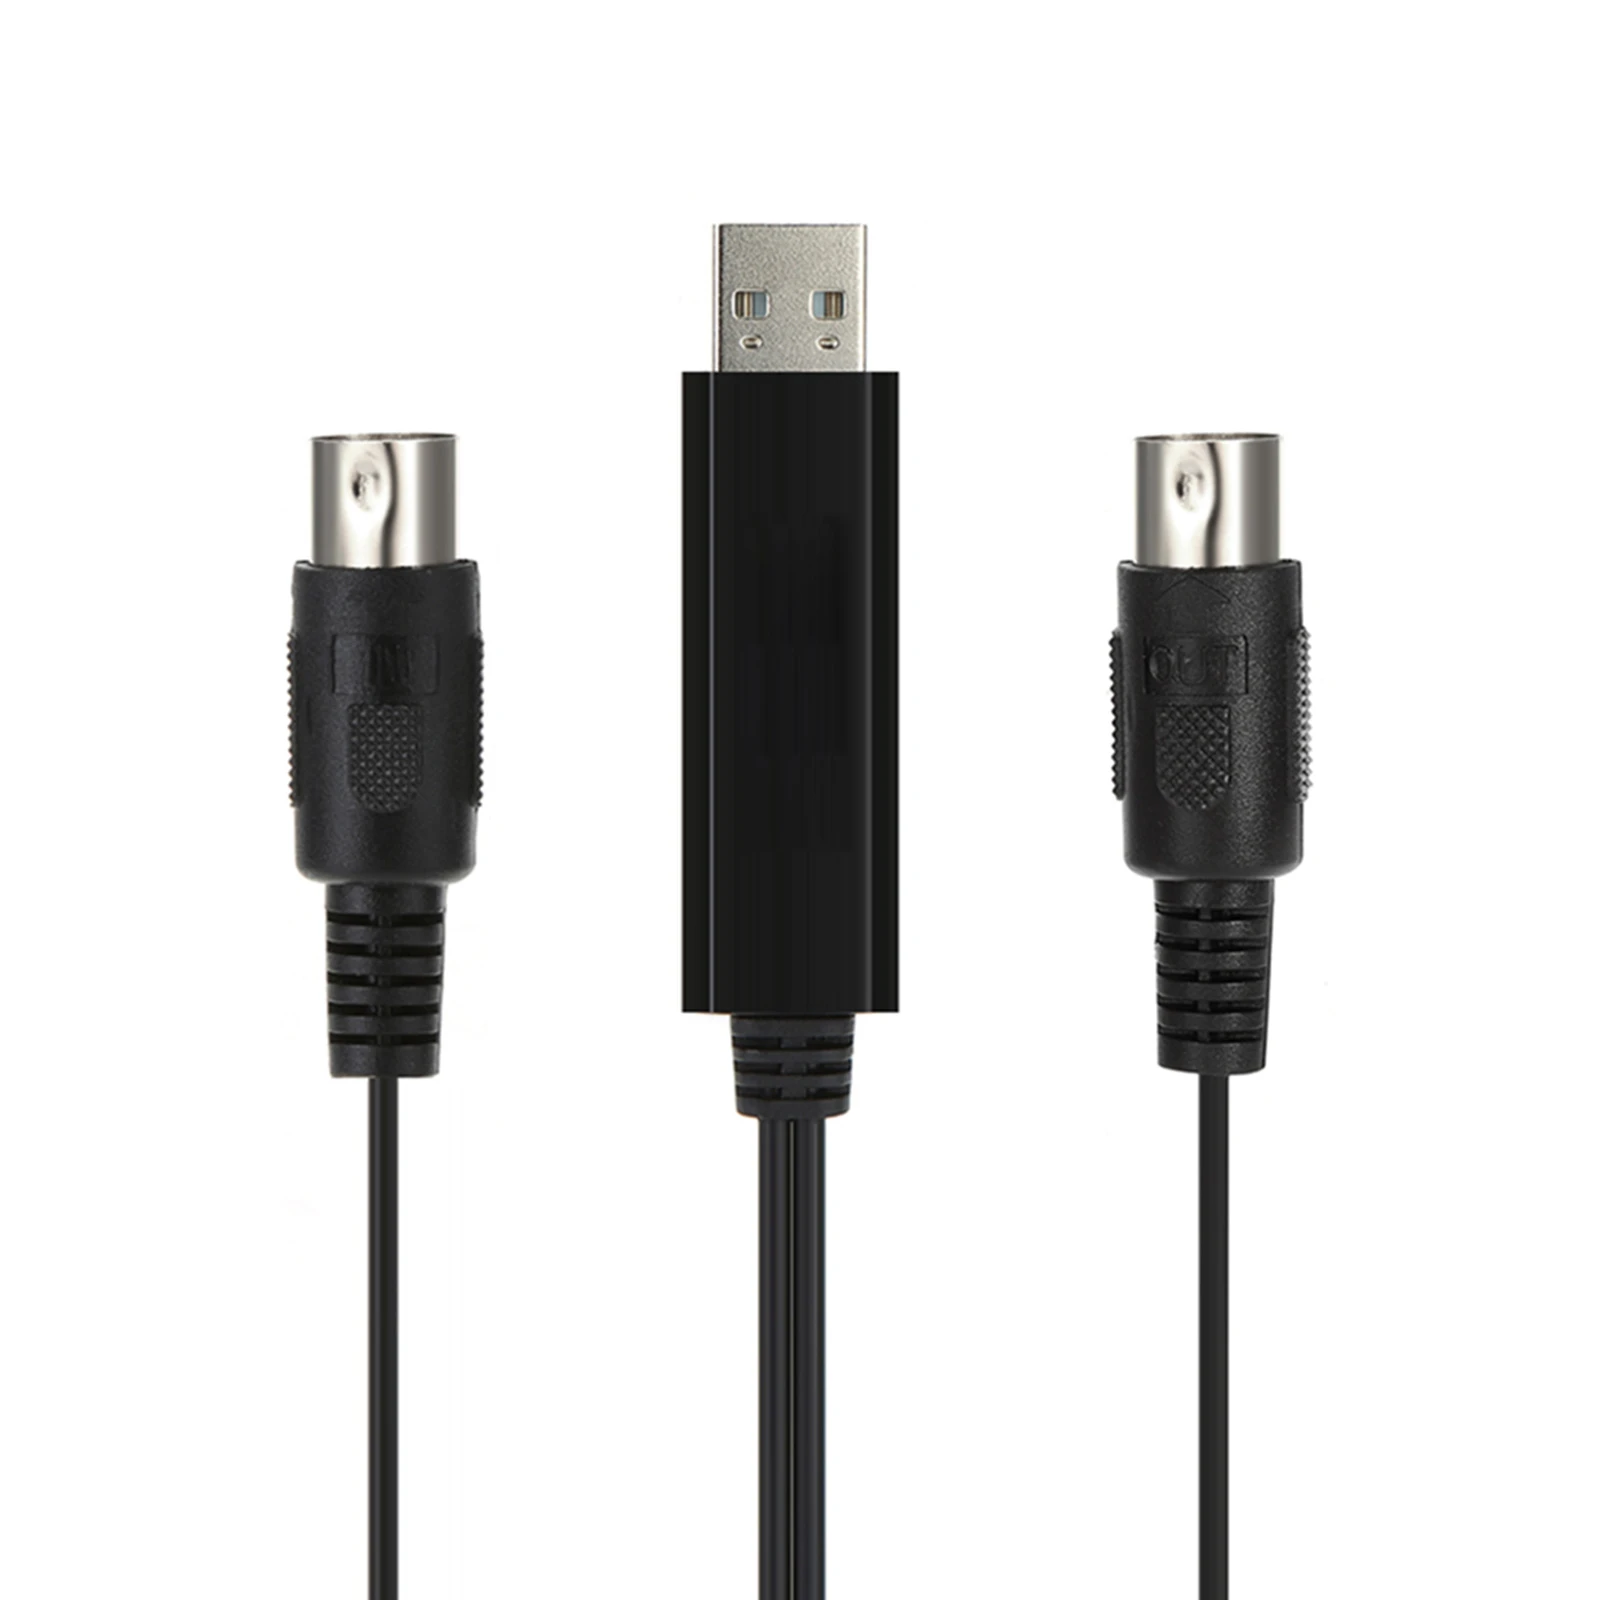 USB IN-OUT MIDI Cable One In One Out Interface 5 Pin Line Converter PC to Music Keyboard Adapter Cord